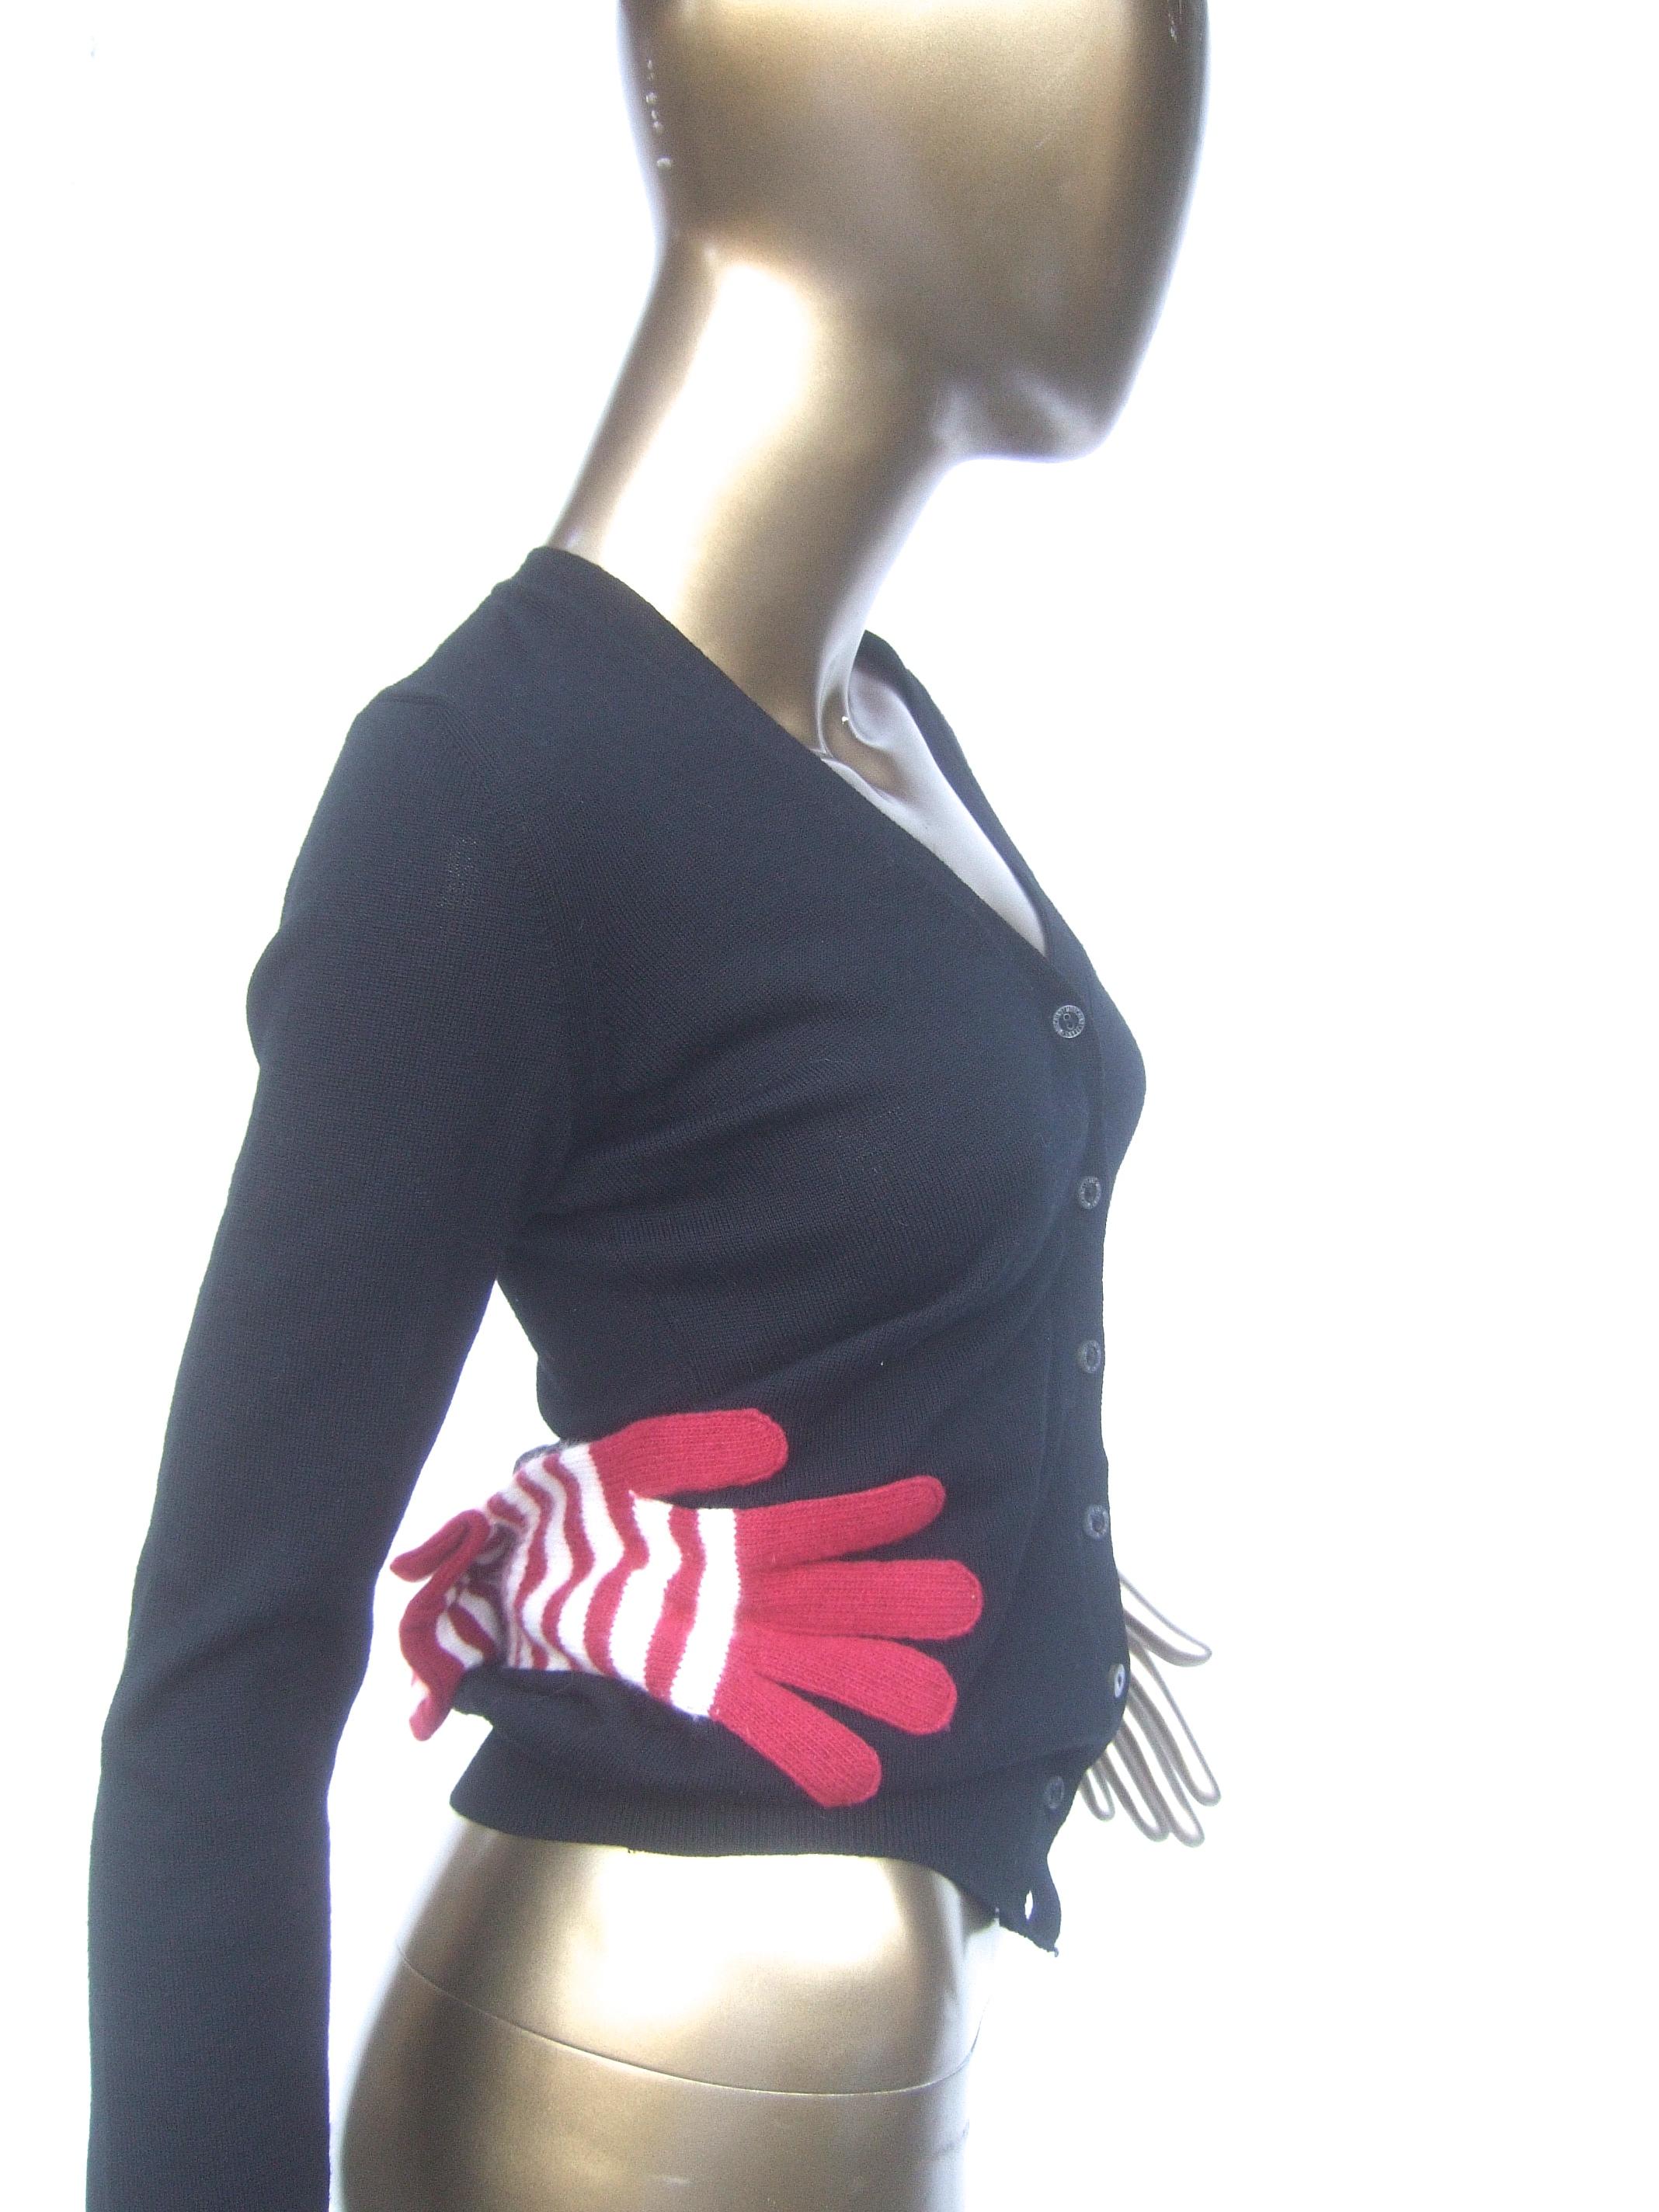 Moschino avant-garde Italian black wool glove design cardigan 
The unique fine wool knit cardigan is designed with a pair of red & white striped wool knit gloves sewn on each of the sides of the cardigan 

The lower back section is designed with a